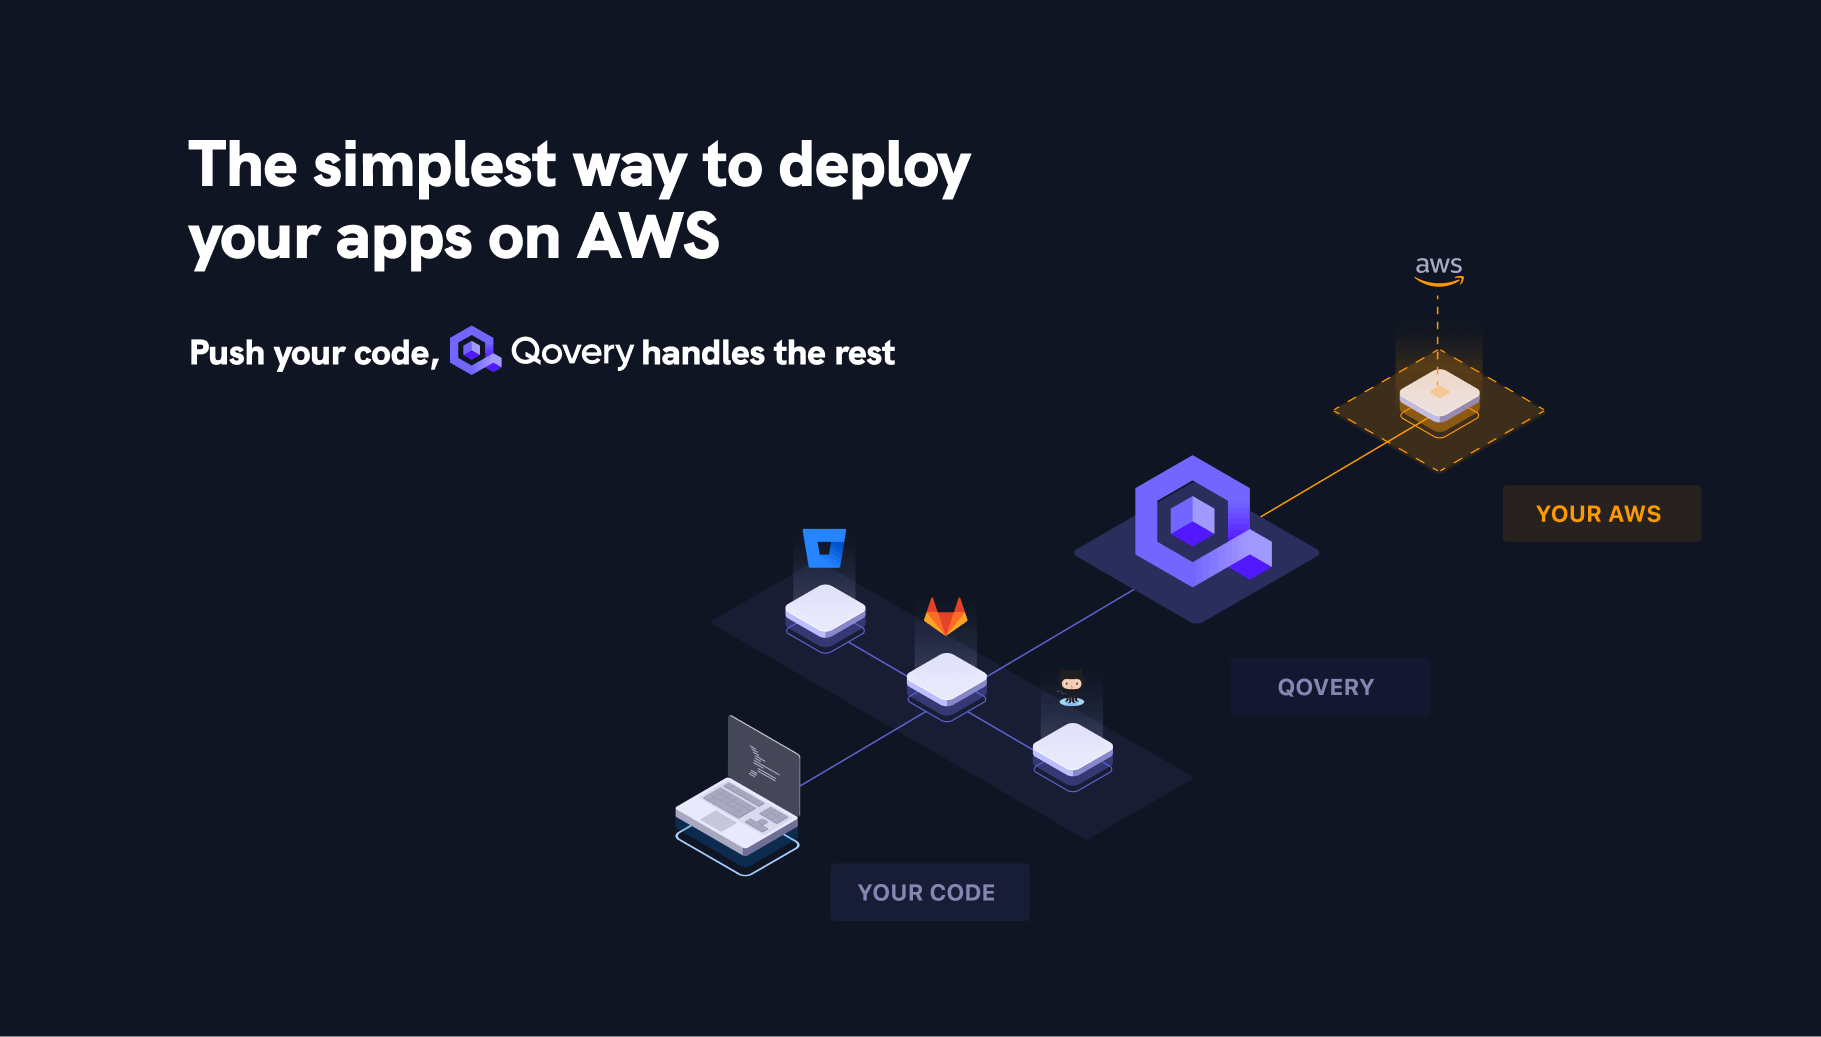 Qovery is the simplest way to deploy your Kubernetes cluster, and run your apps on your AWS account